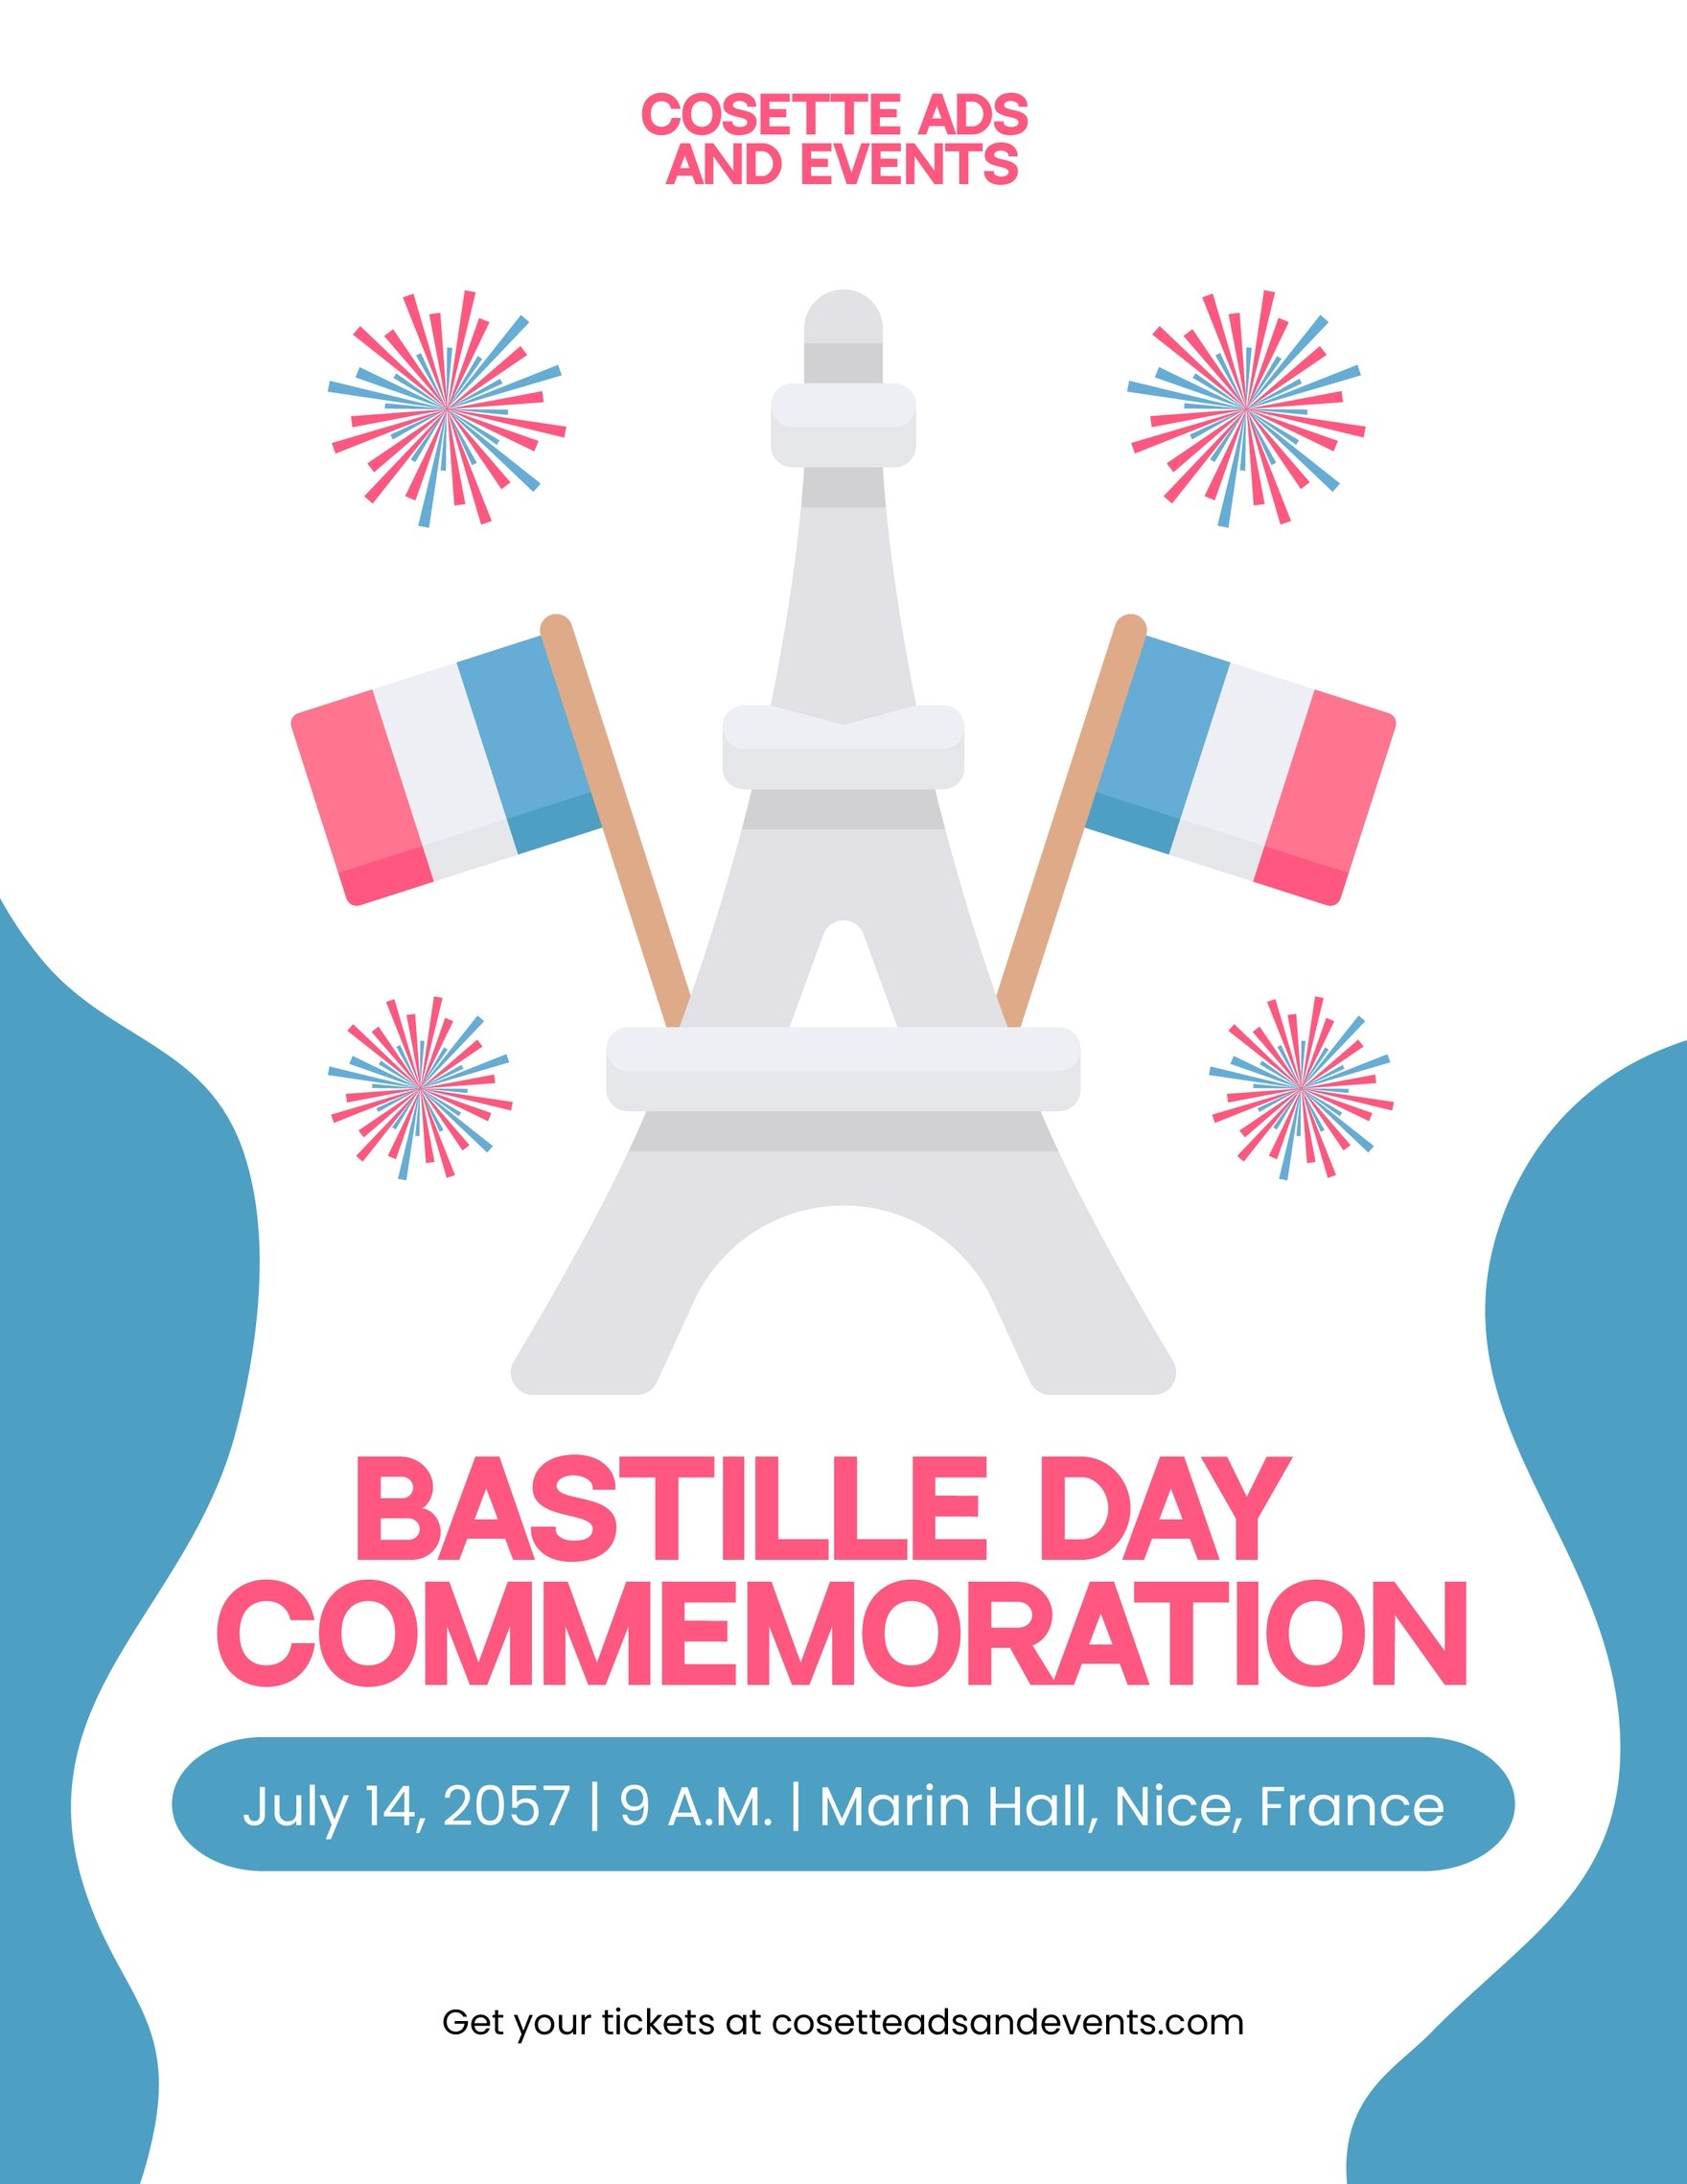 Free Editable Bastille Day Event Flyer Template in Word, Google Docs, Illustrator, PSD, Apple Pages, Publisher